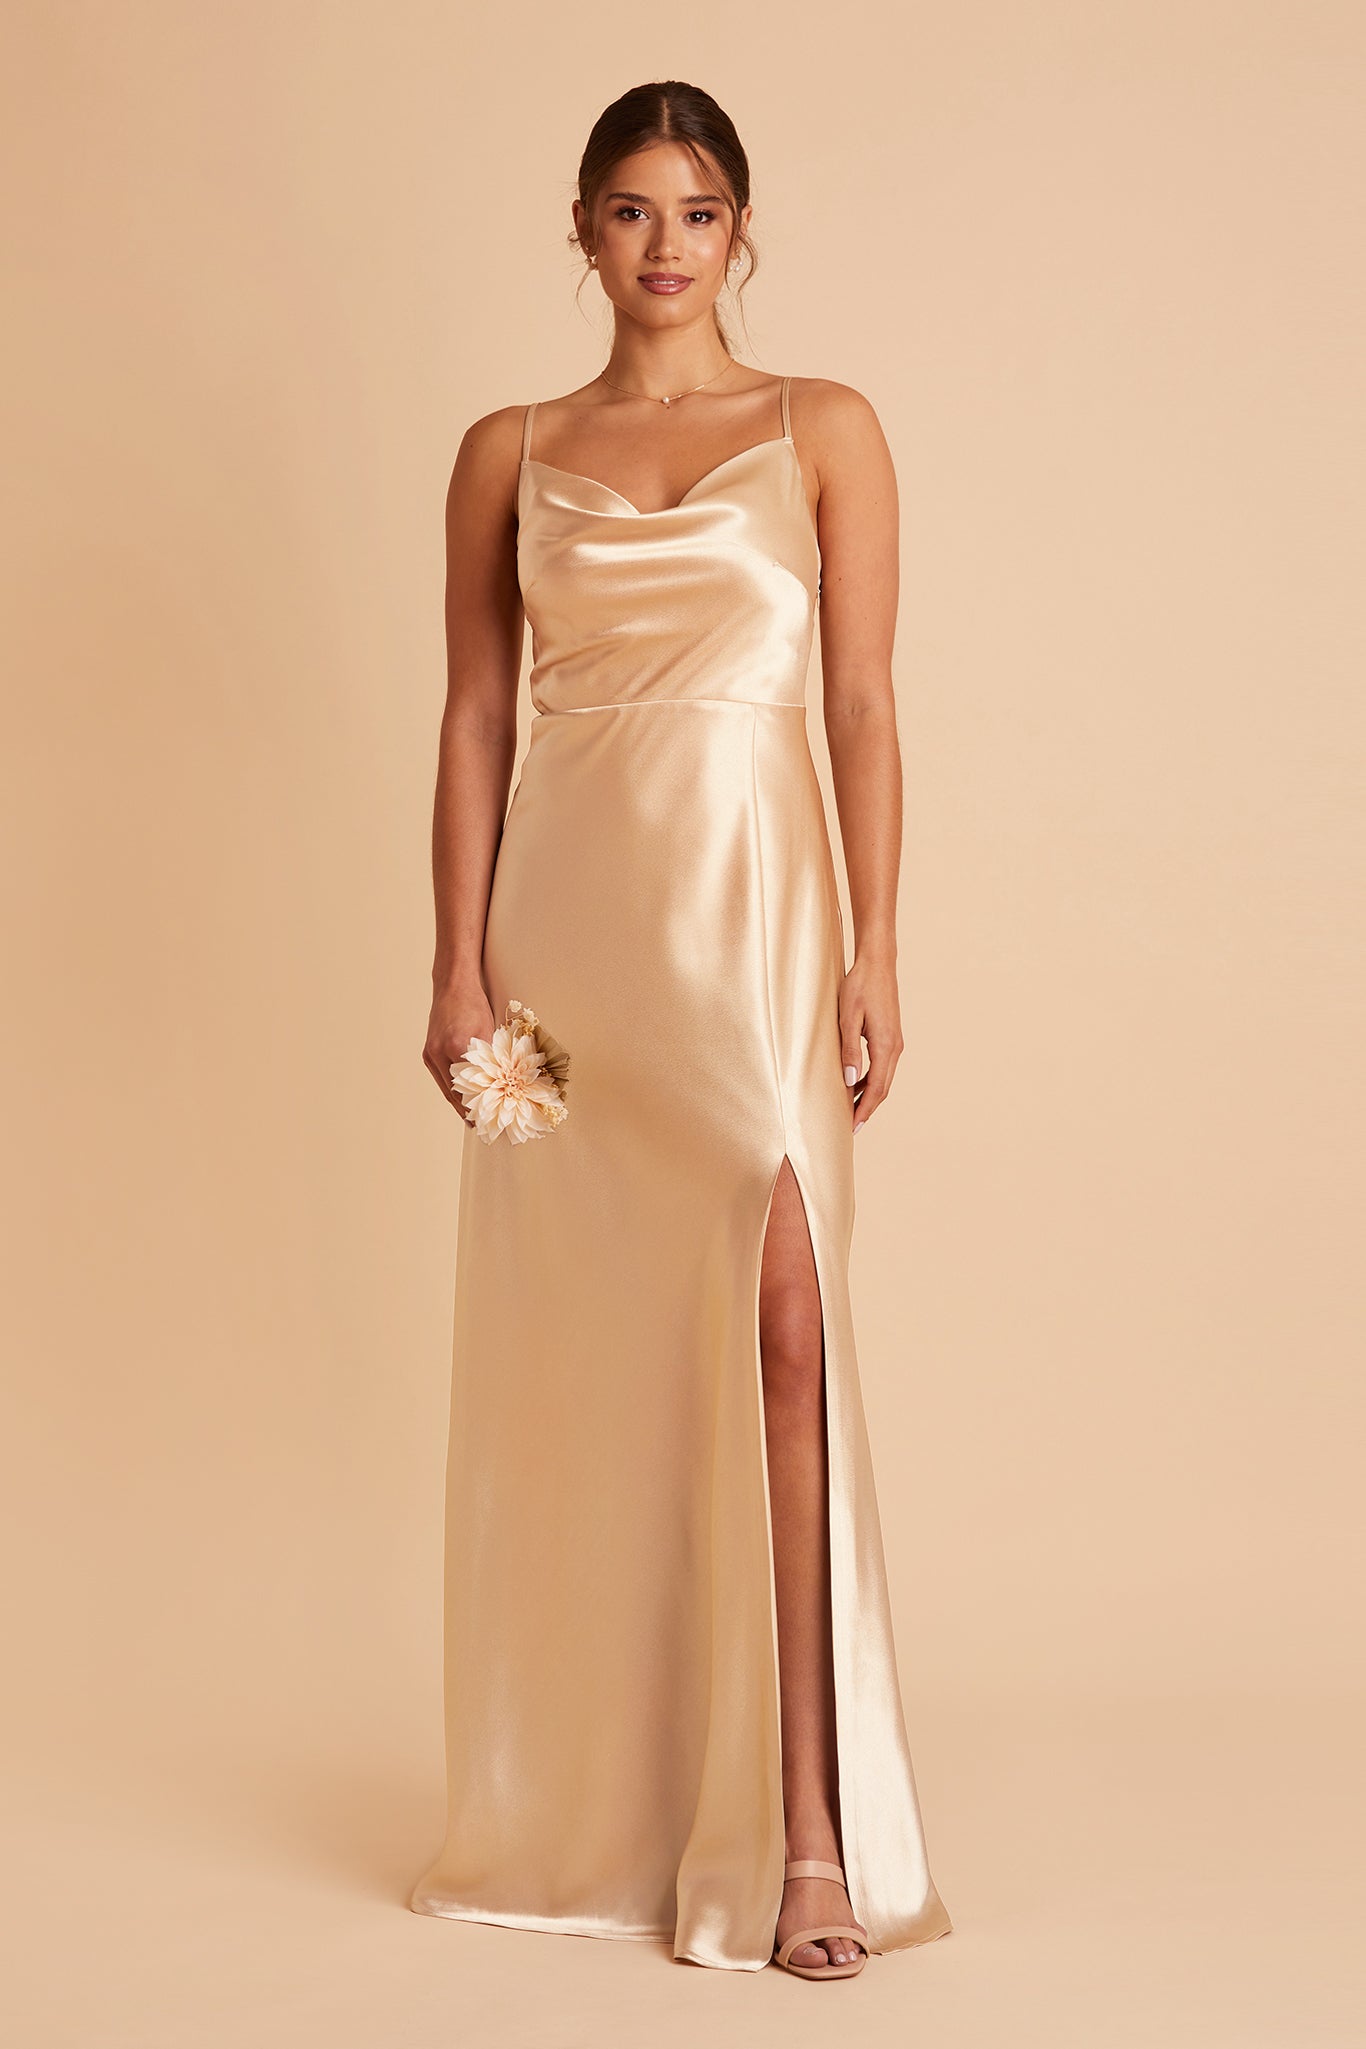 Front view of the Lisa Long Dress in gold satin shows a model with their left leg and foot revealed through a mid-thigh high dress slit. They wear the Natalie Chunky Heel shoes in nude blush.